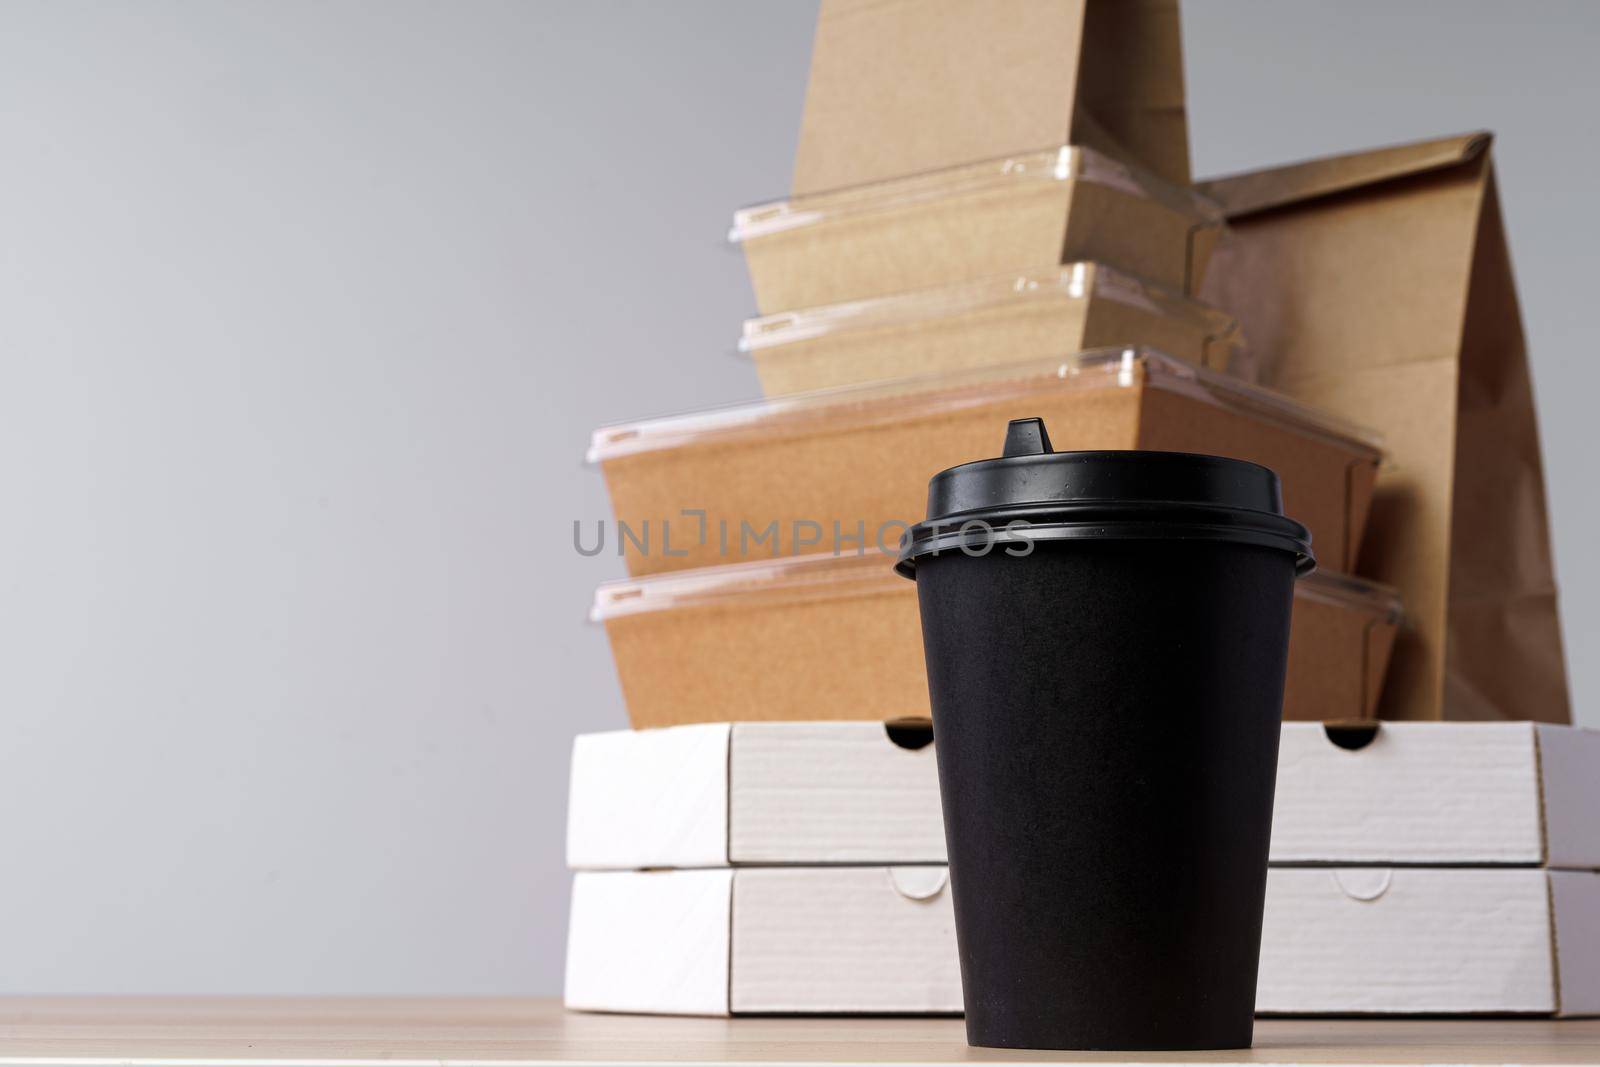 Many various take-out food containers, pizza box, coffee cups and paper bags on light grey background. Food delivery